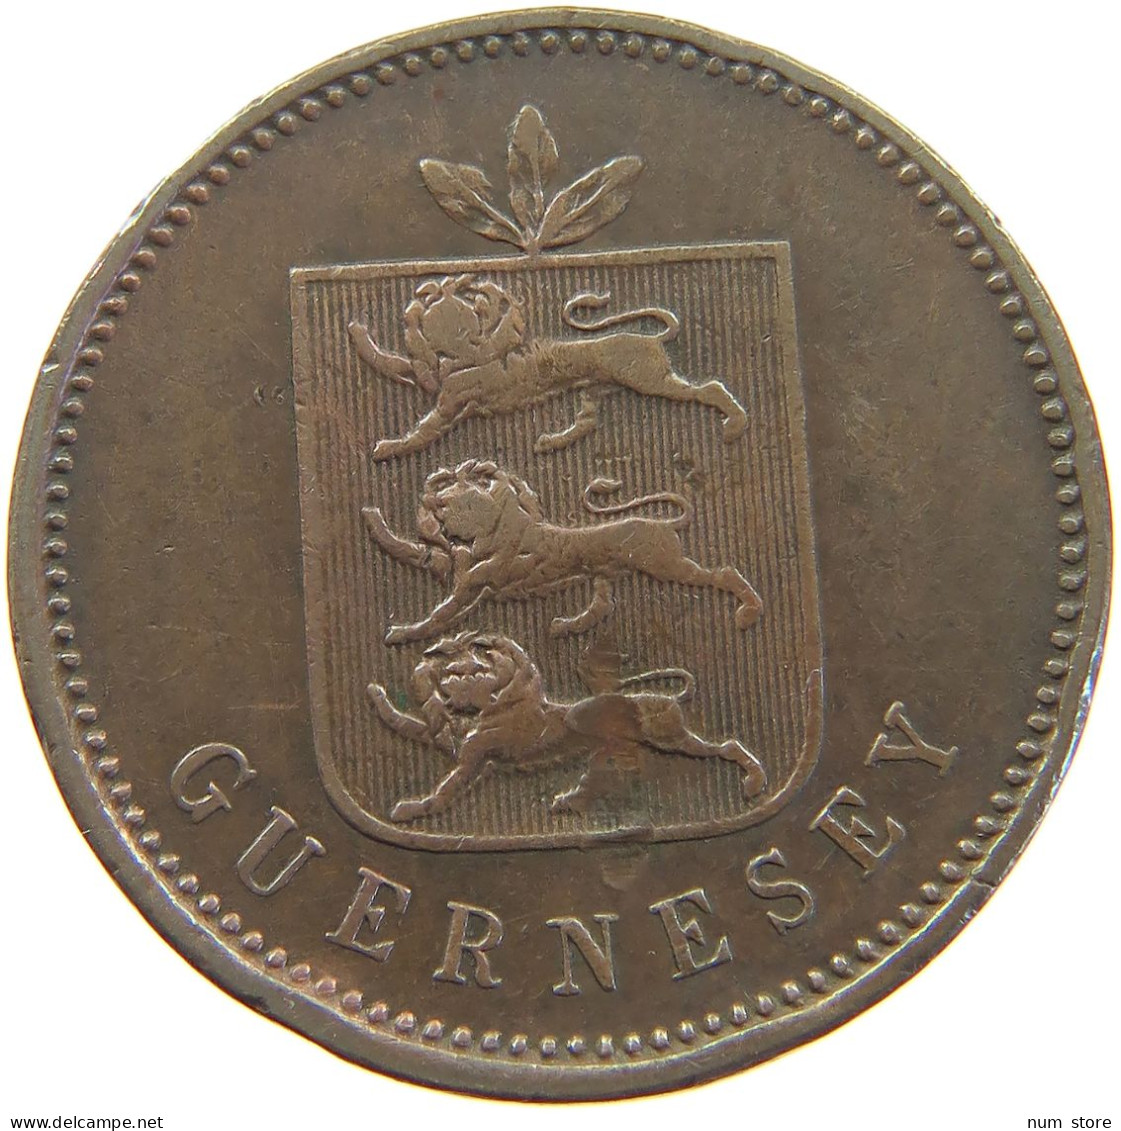 GUERNSEY 4 DOUBLES 1830 WILLIAM IV. (1830-1837) #MA 064893 - Guernsey